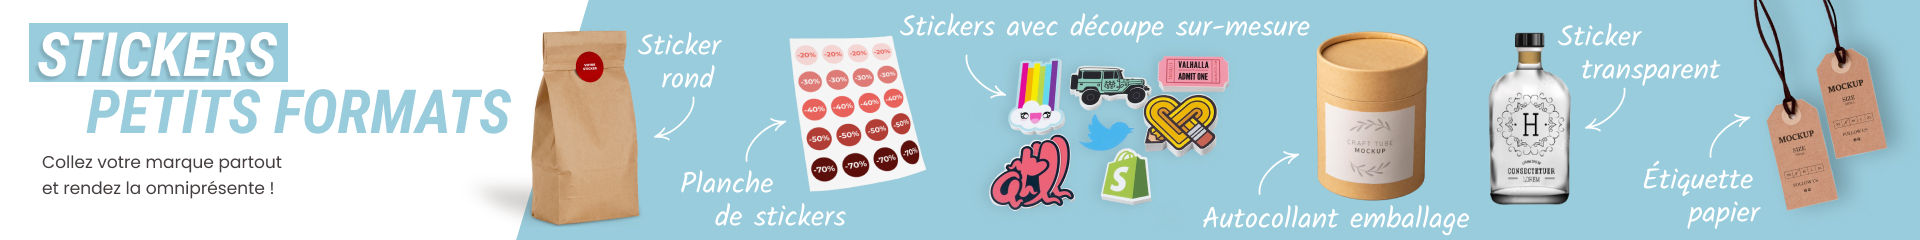 Stickers petits formats